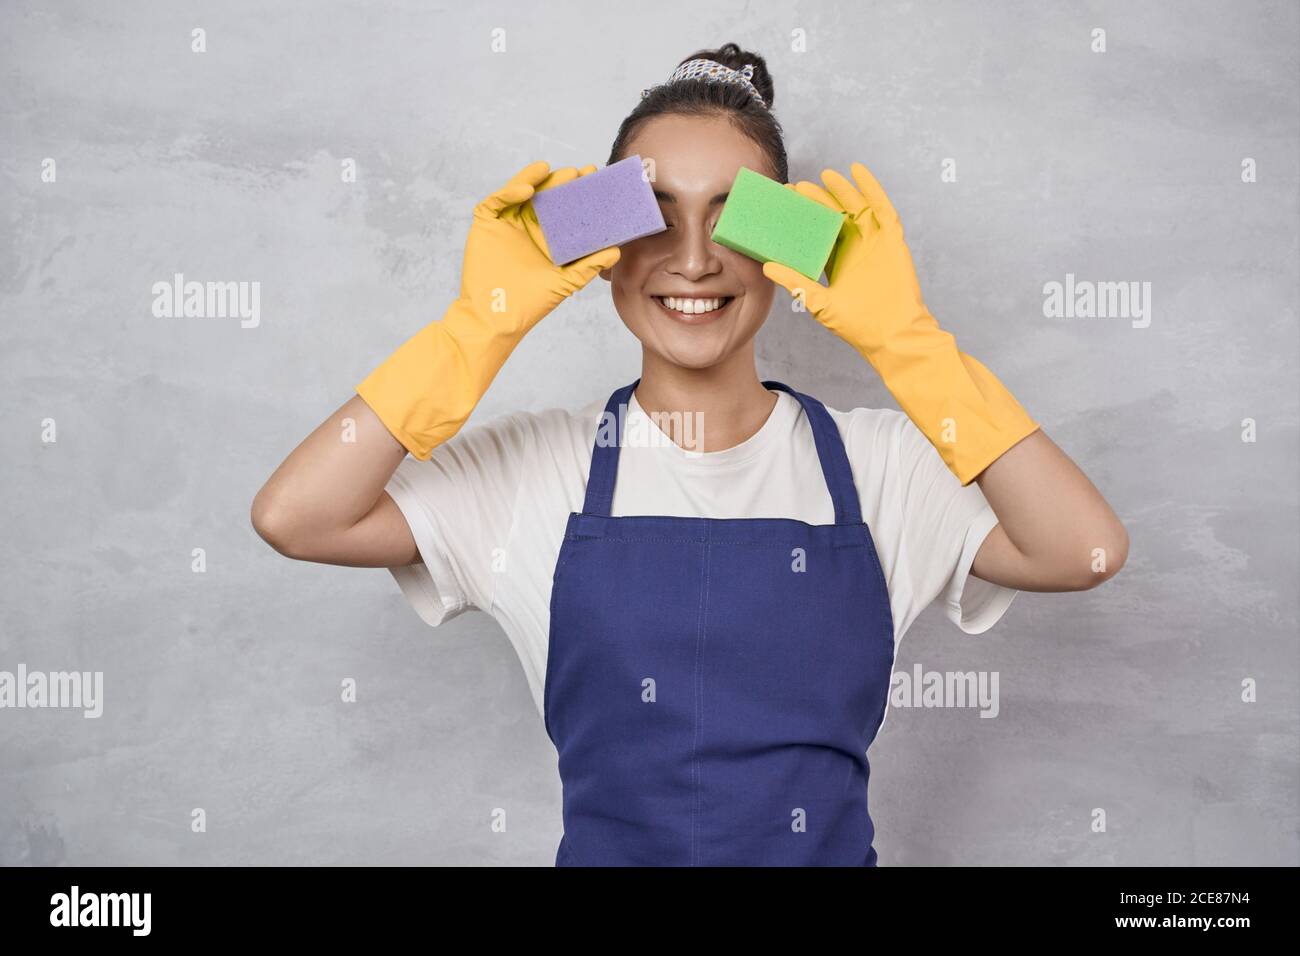 Funny cleaning lady in uniform and rubber gloves covering eyes with kitchen sponges for cleaning and washing dishes, having fun while standing against grey wall. Cleaning services, Housekeeping Stock Photo